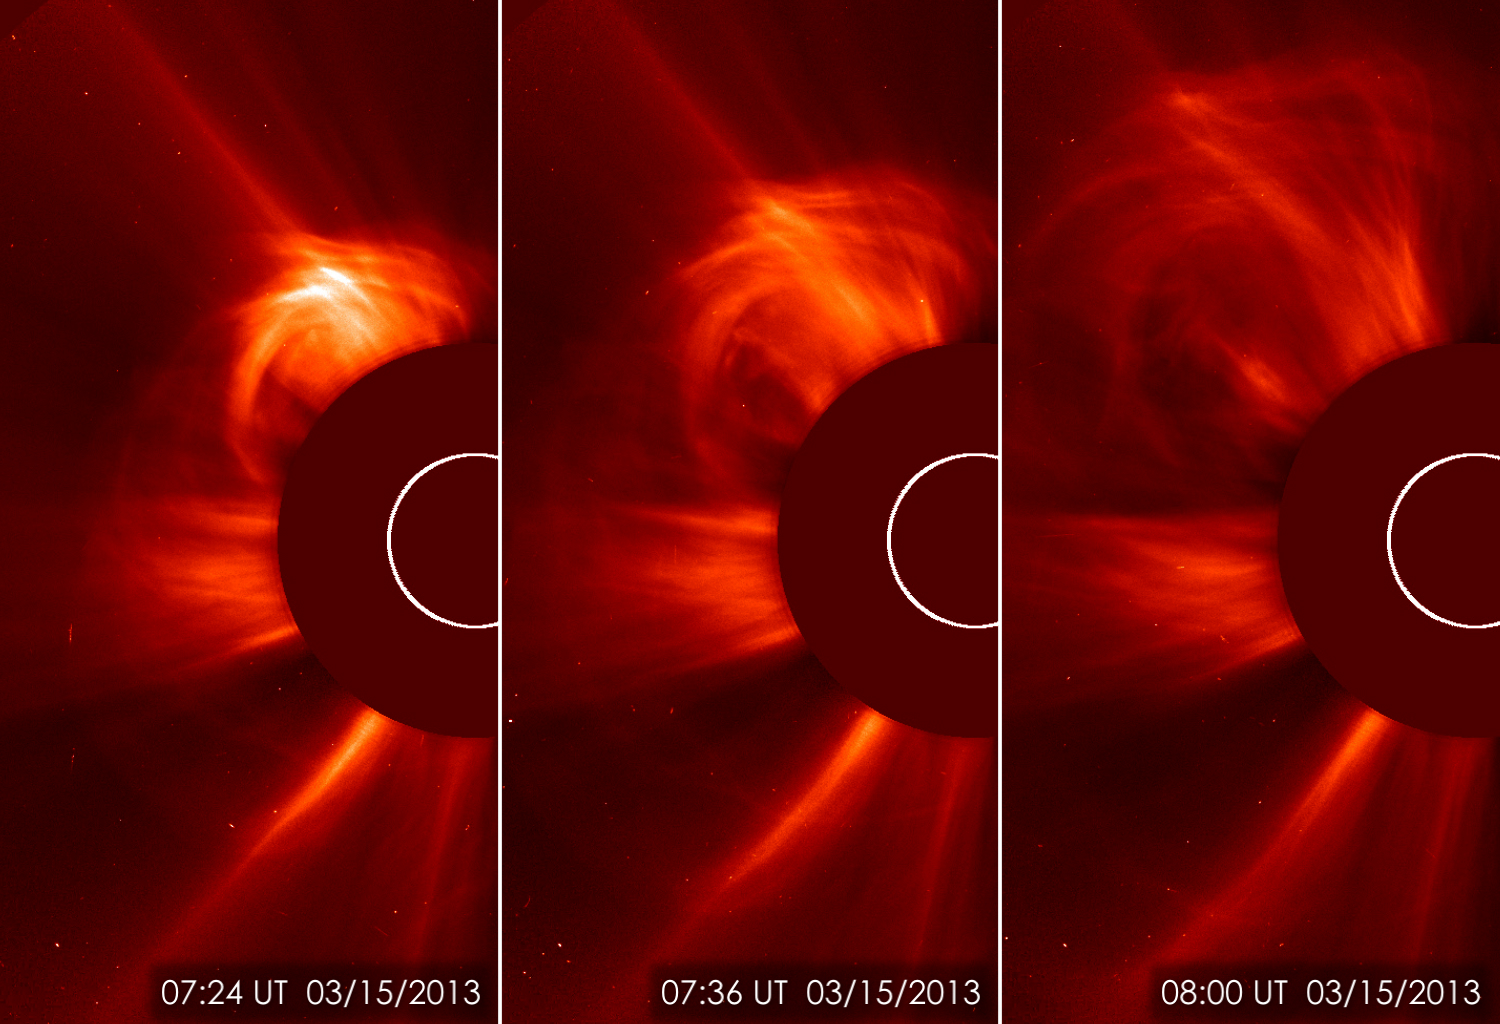 Earthdirected coronal mass ejection from the sun